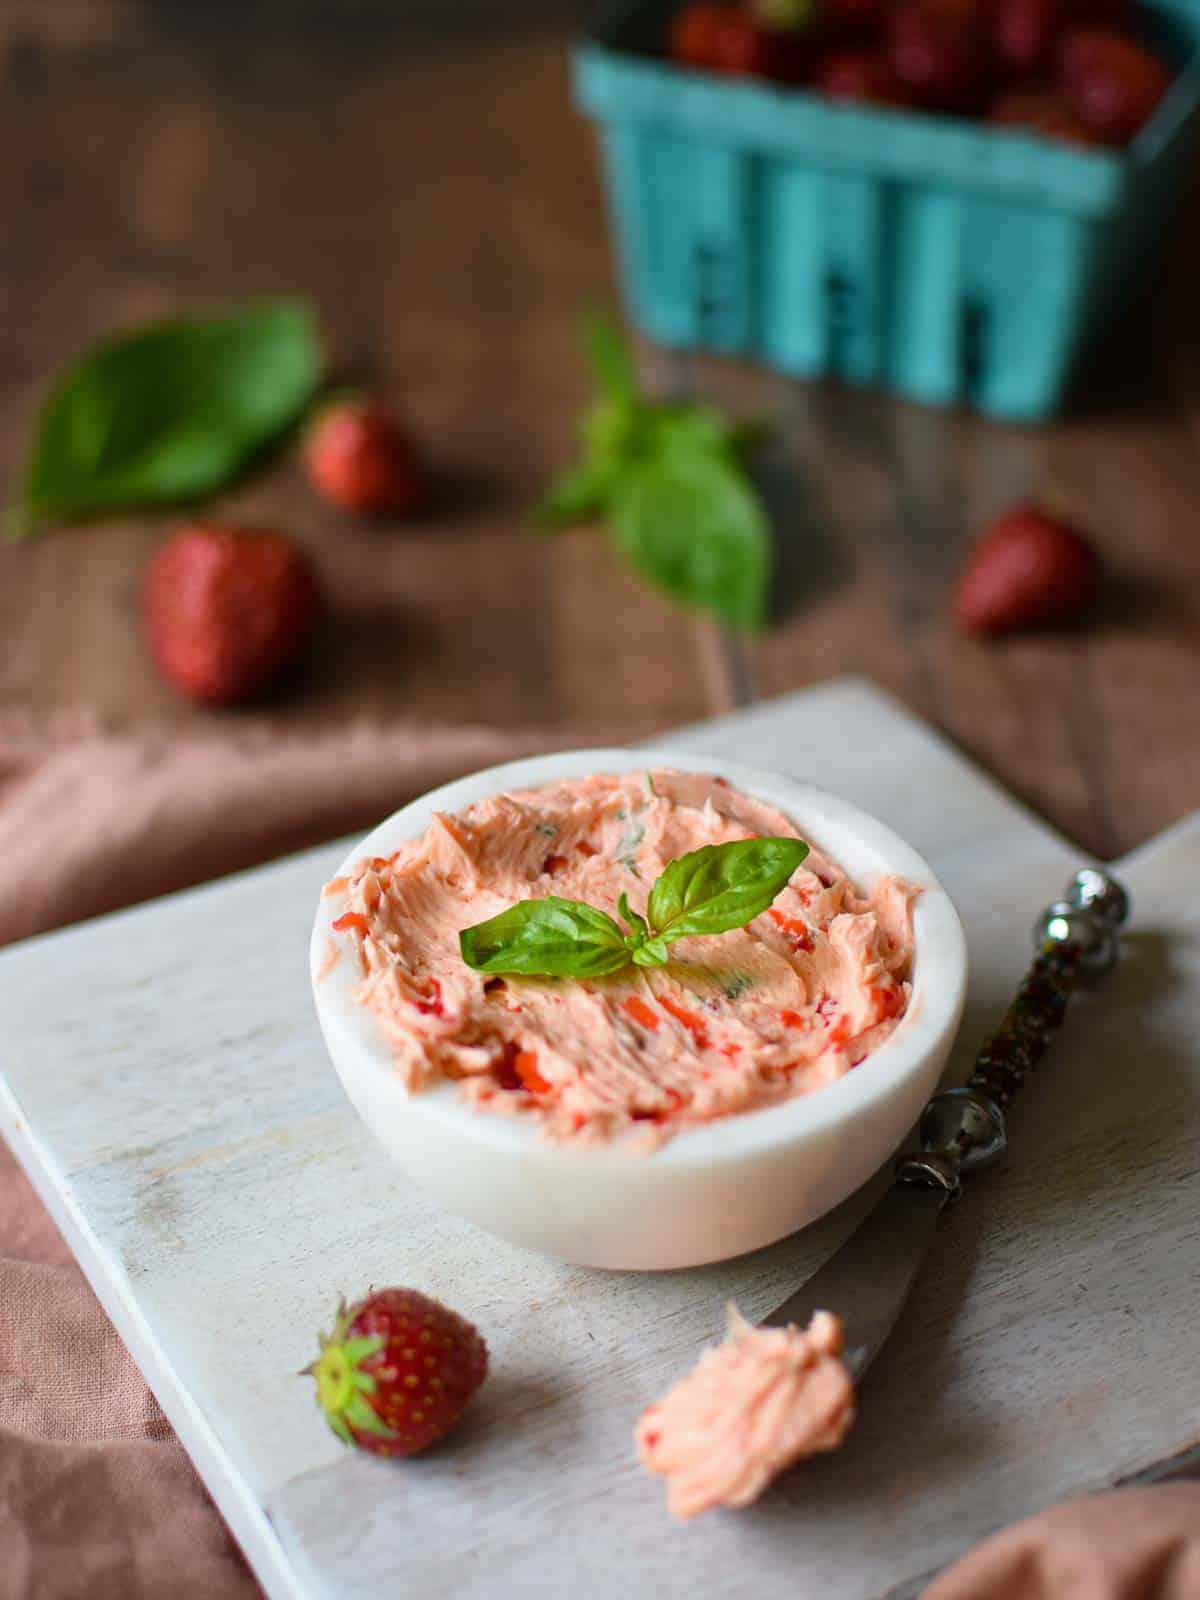 Whipped strawberry butter in a white bowl on a wooden background.